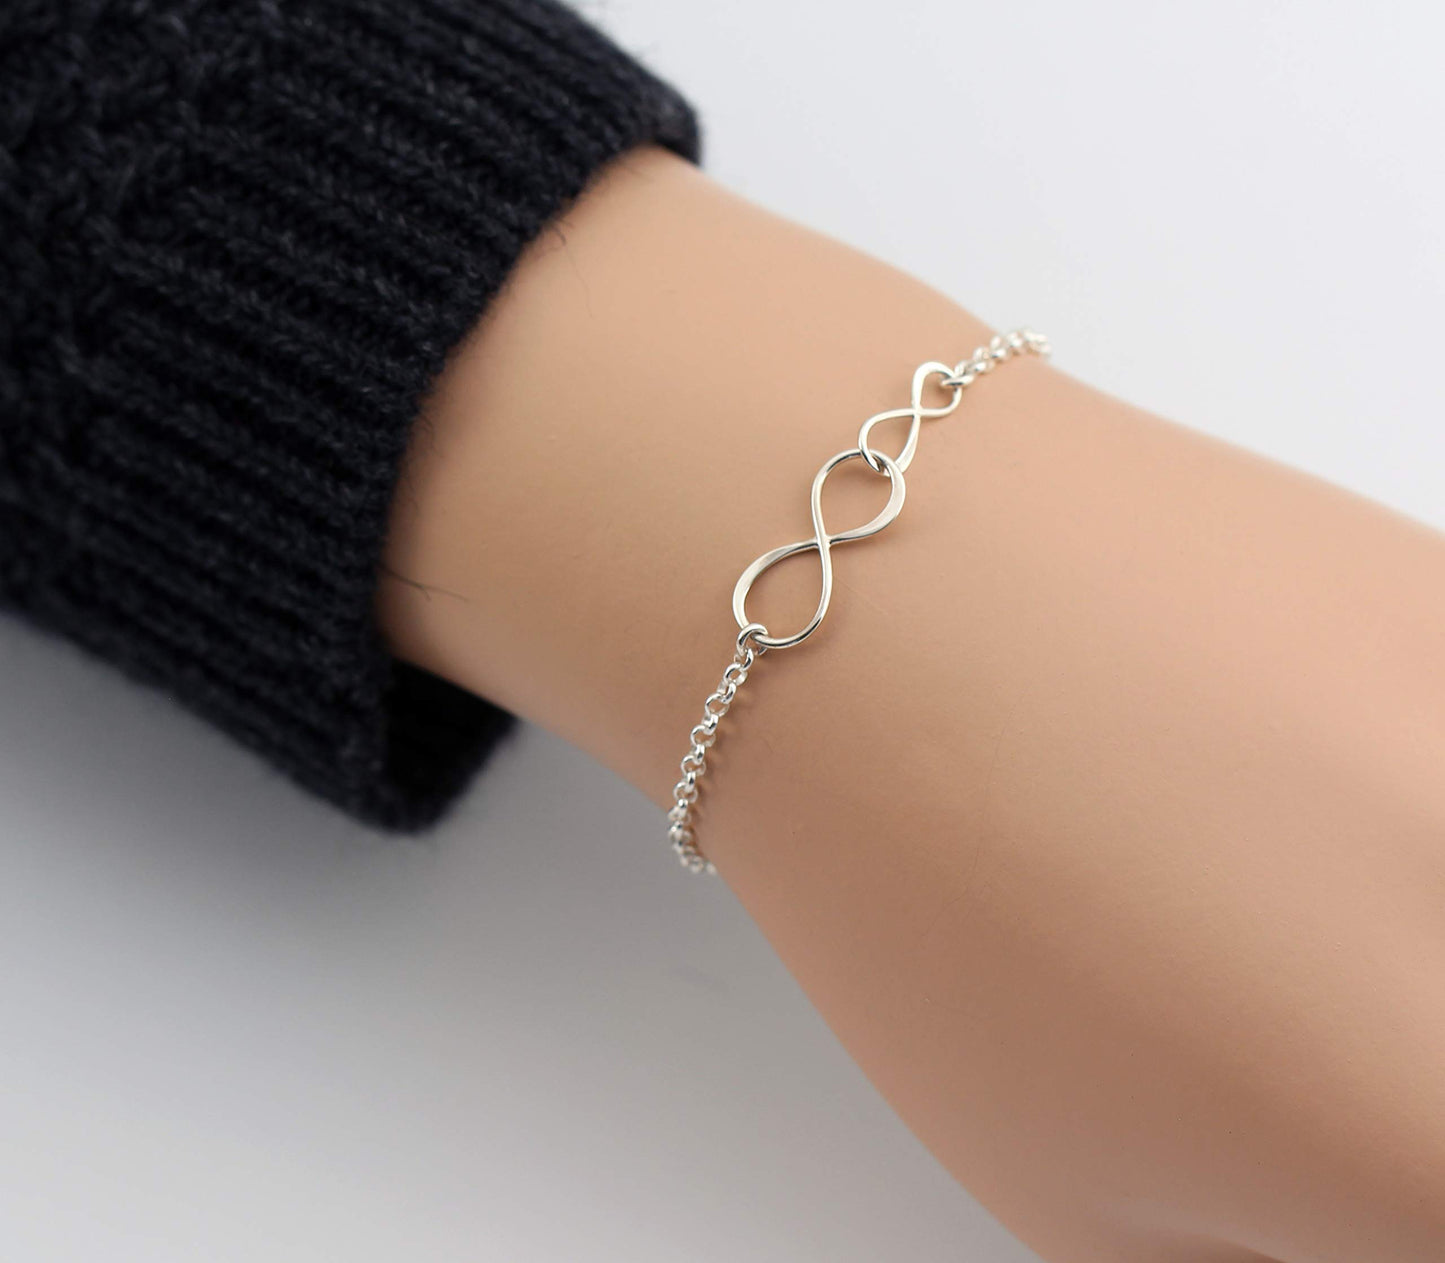 Grandmother Granddaughter Bracelet • Handmade Sterling Silver Bracelet • Two Connected Infinity Bracelet • 2 Infinity • Eternity Circles • Gifts for Grandma Adult Granddaughter • Meaningful Jewelry